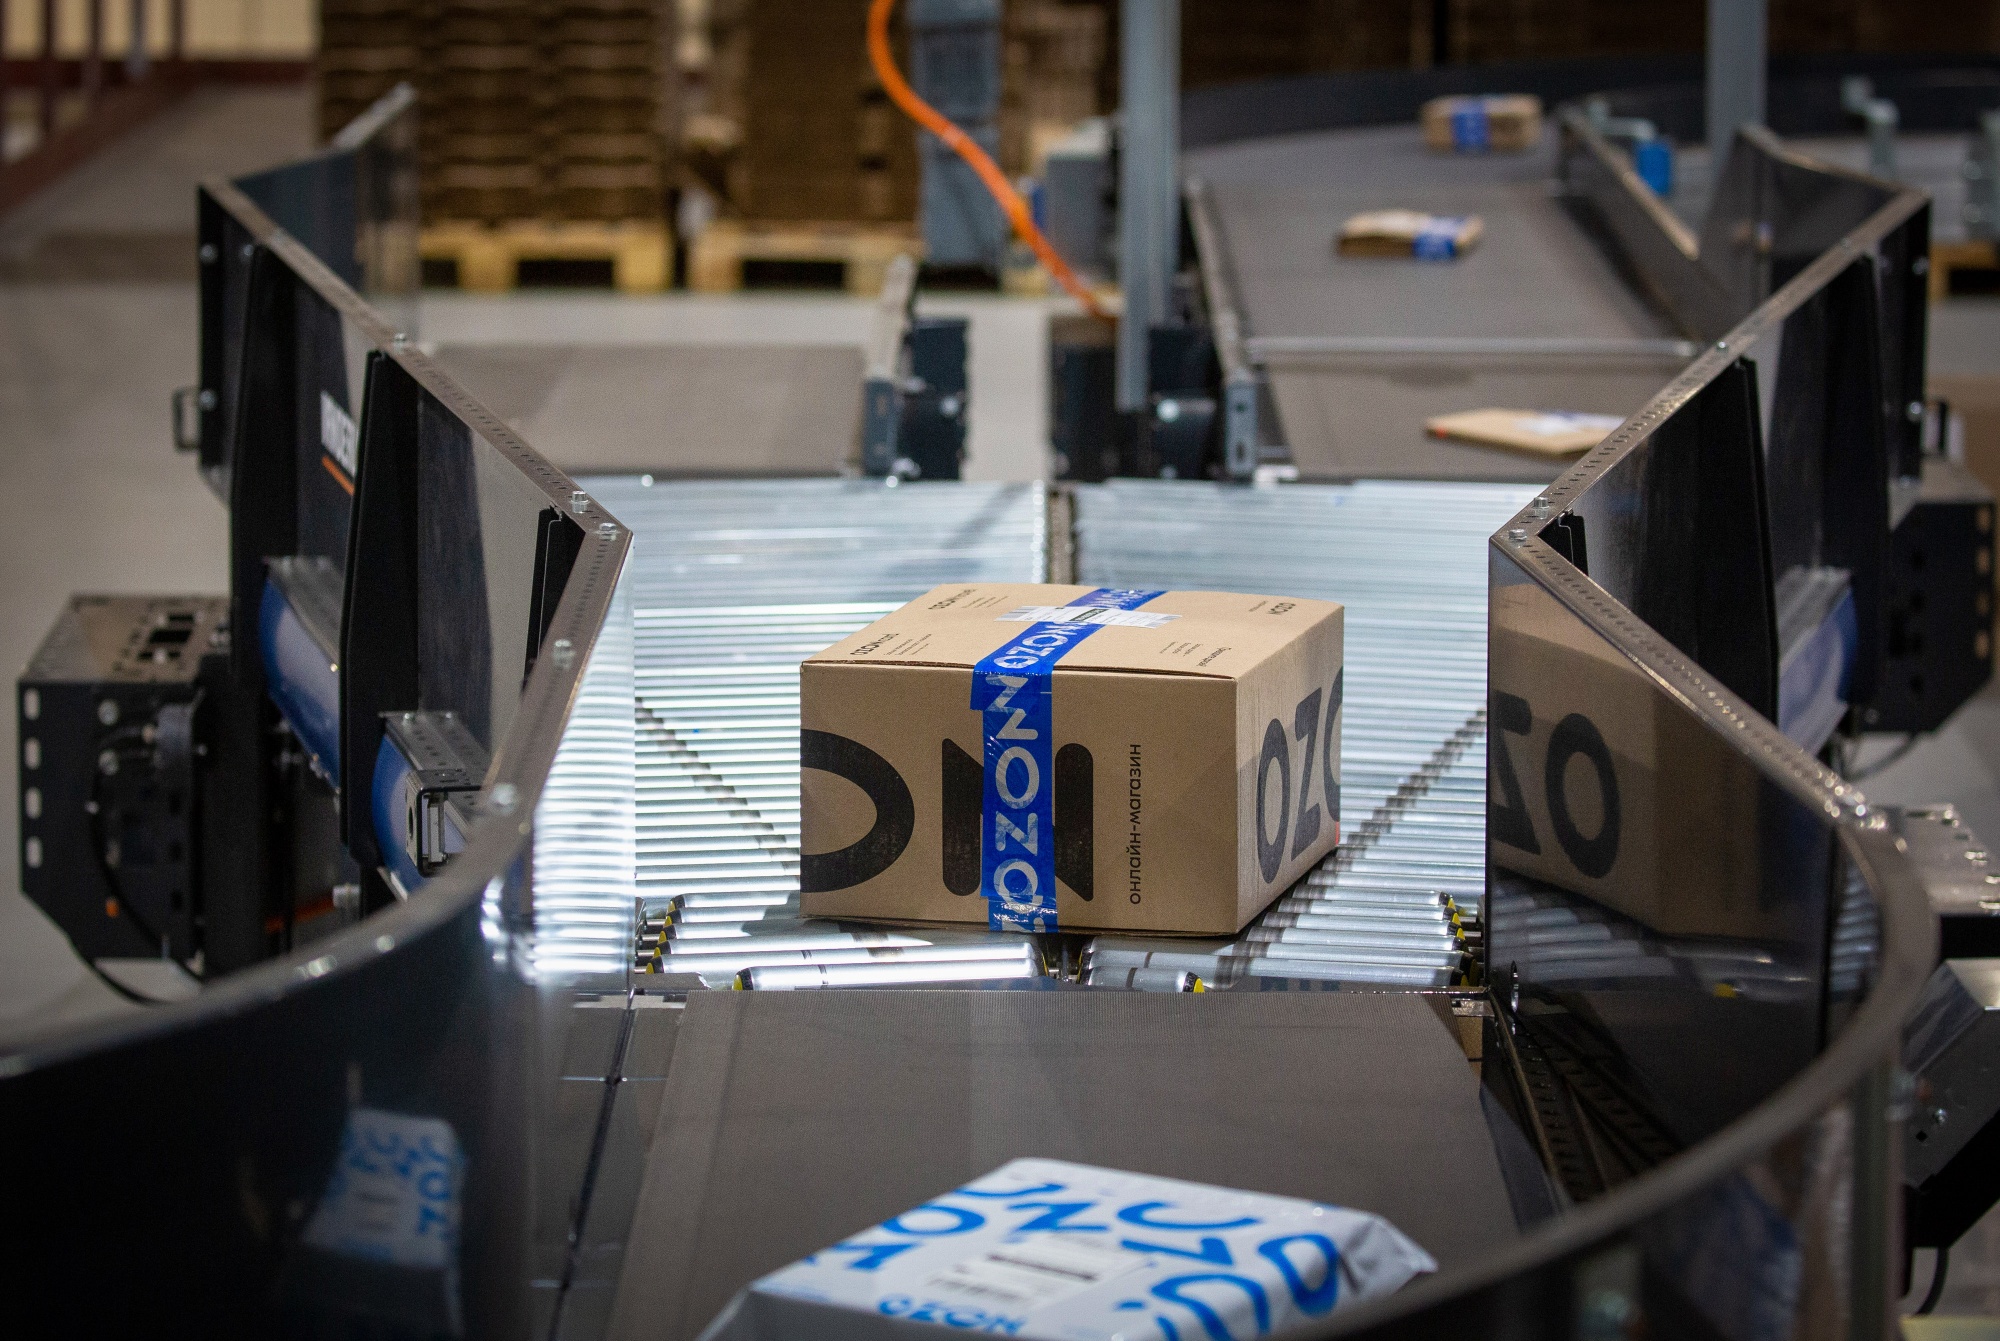 Packaged orders move along a conveyor belt at an Ozon fulfillment center in Horugvino village, outside Moscow.